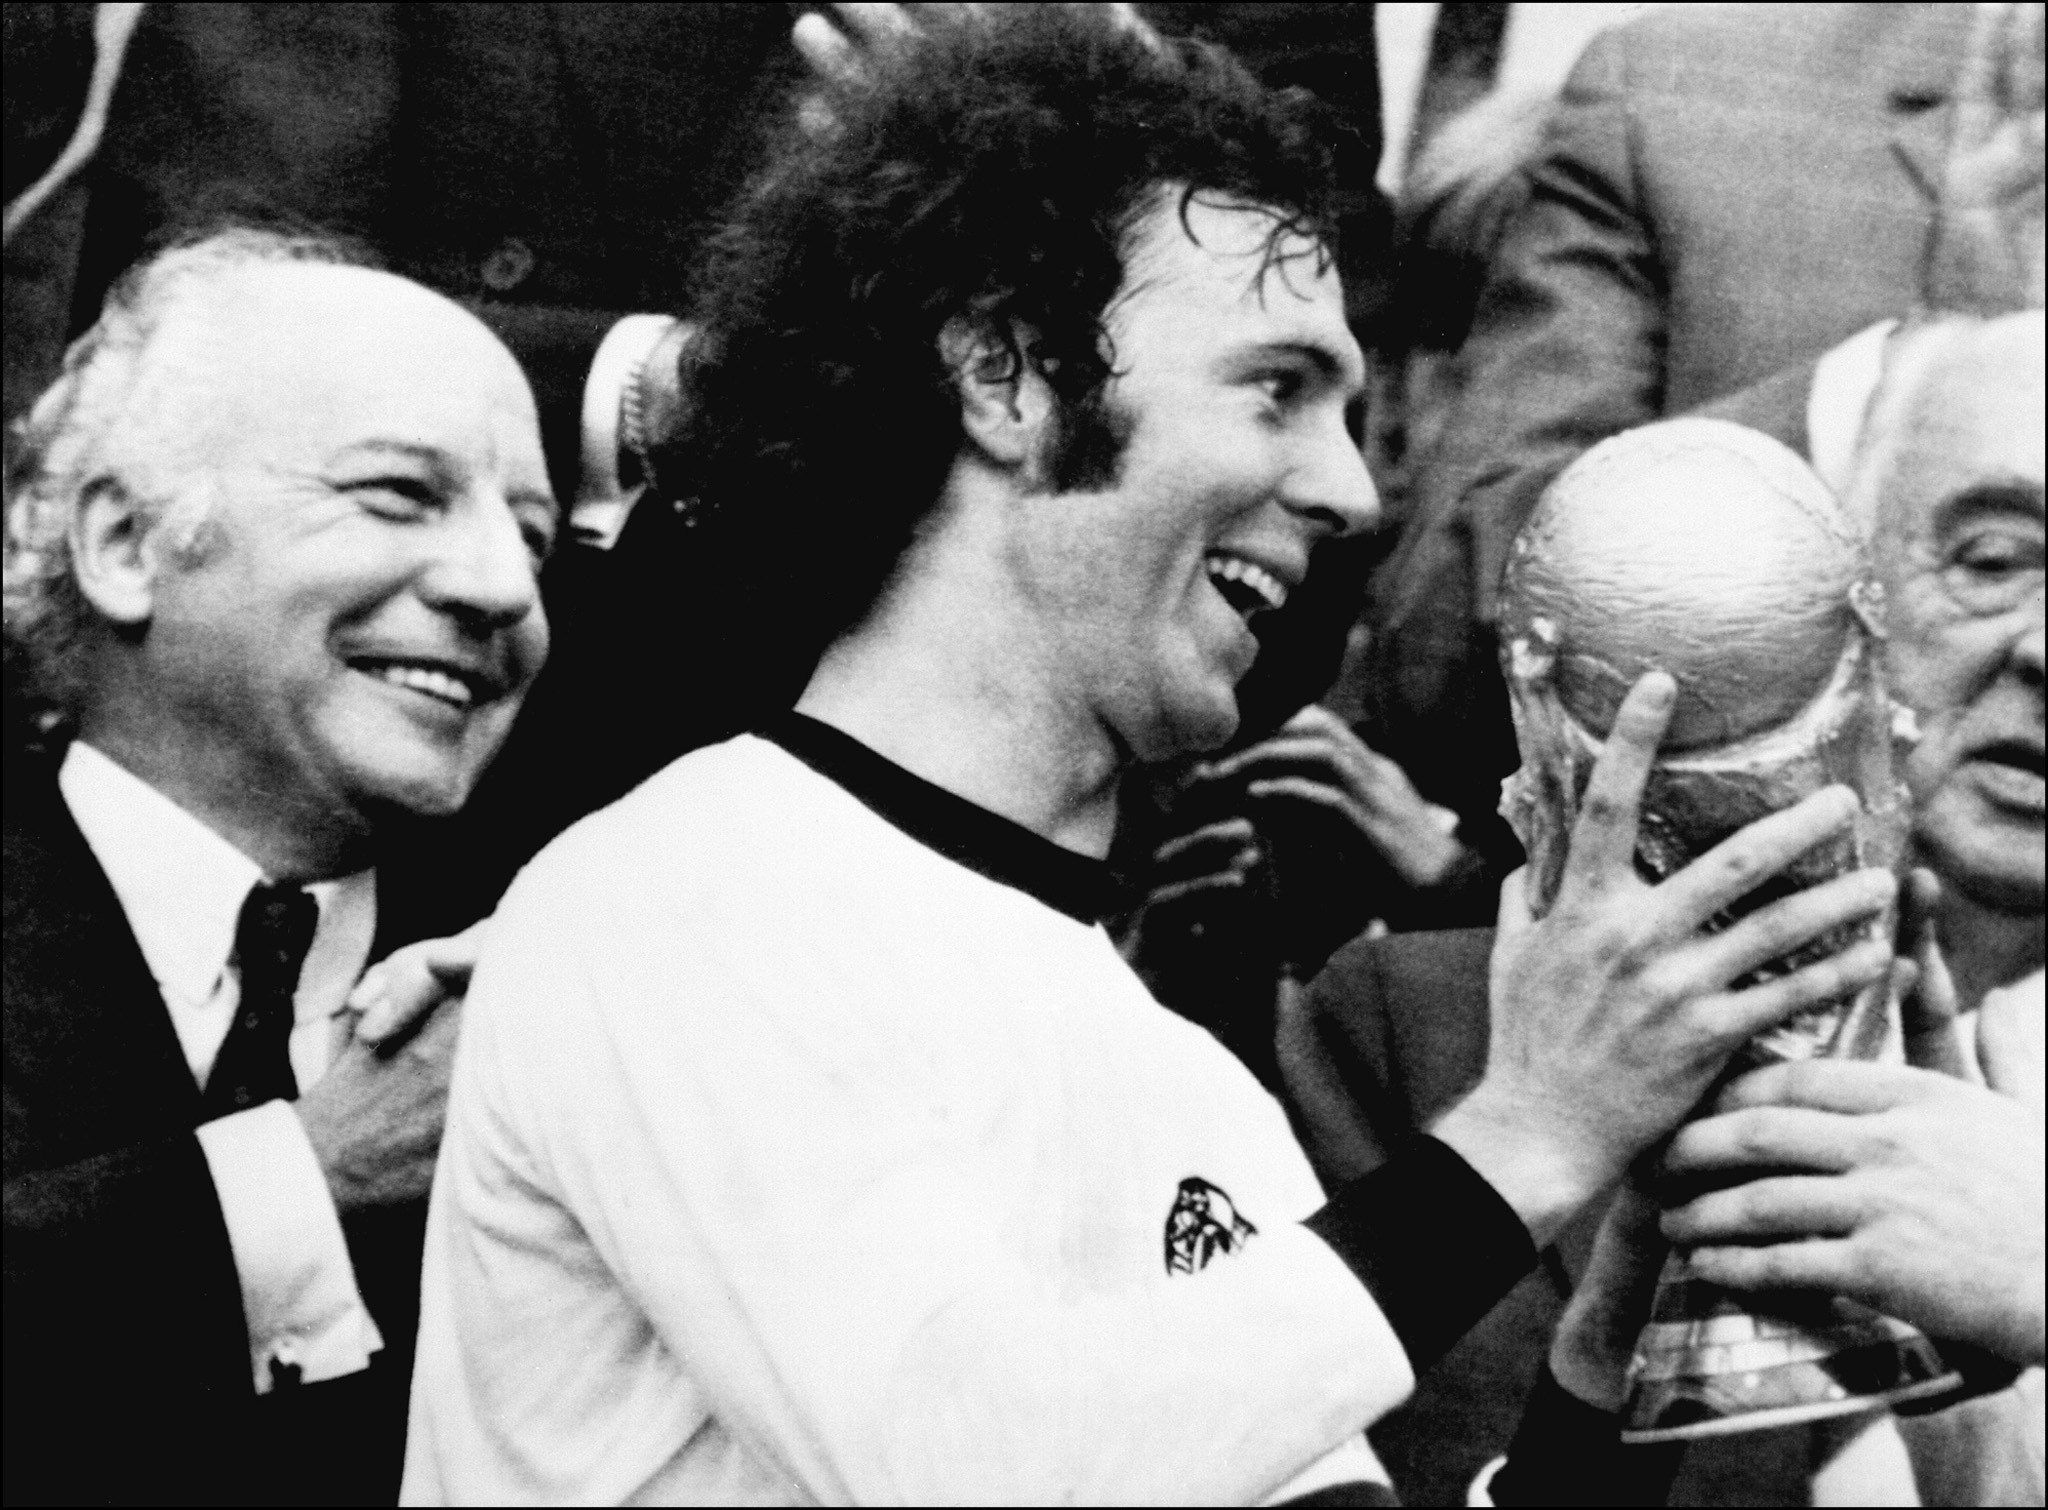 Franz Beckenbauer best young players in World Cup history